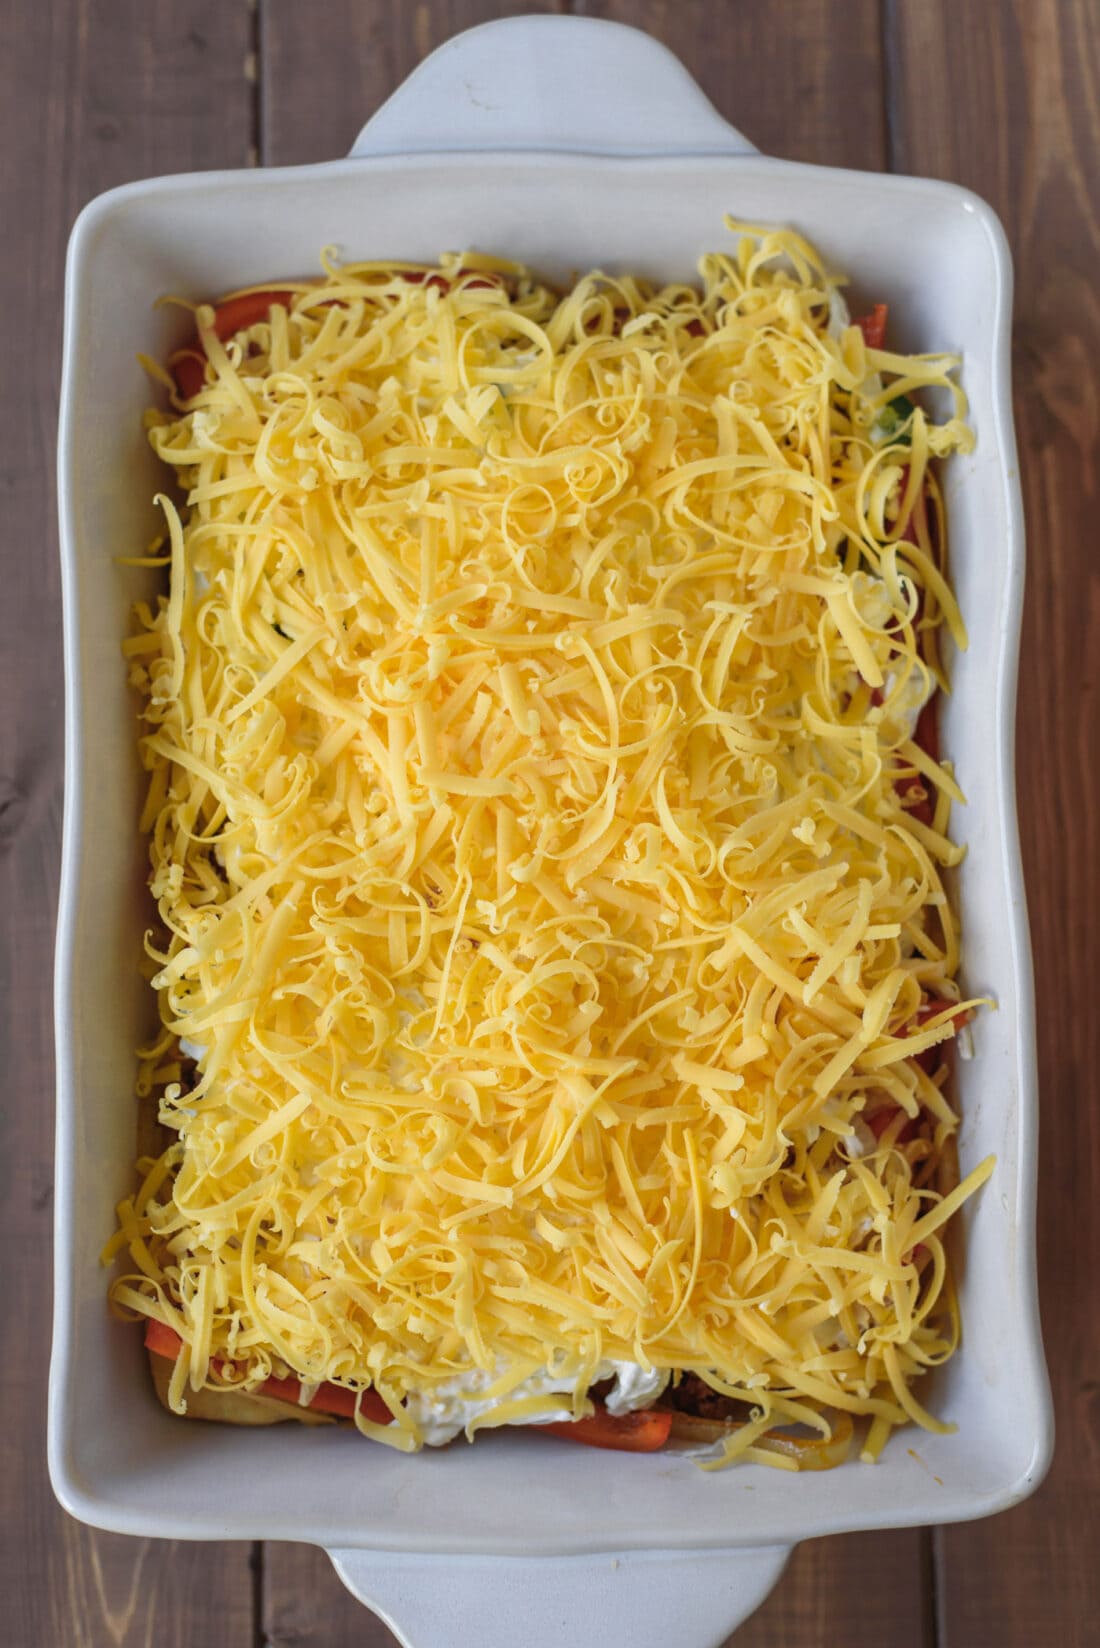 Casserole topped with shredded cheese